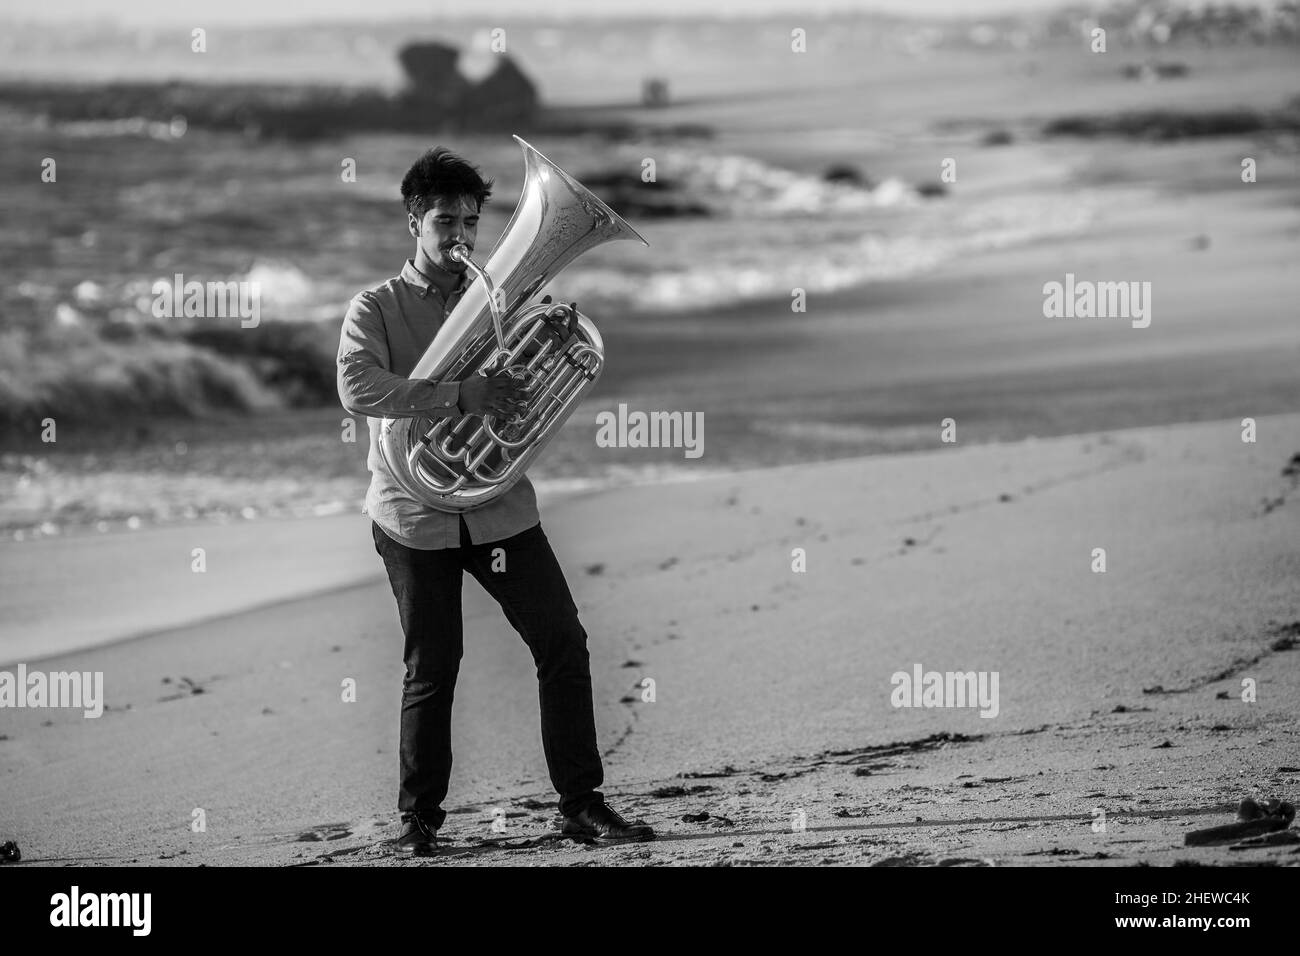 A musician playing a tuba on the ocean. Black and white photo. Stock Photo